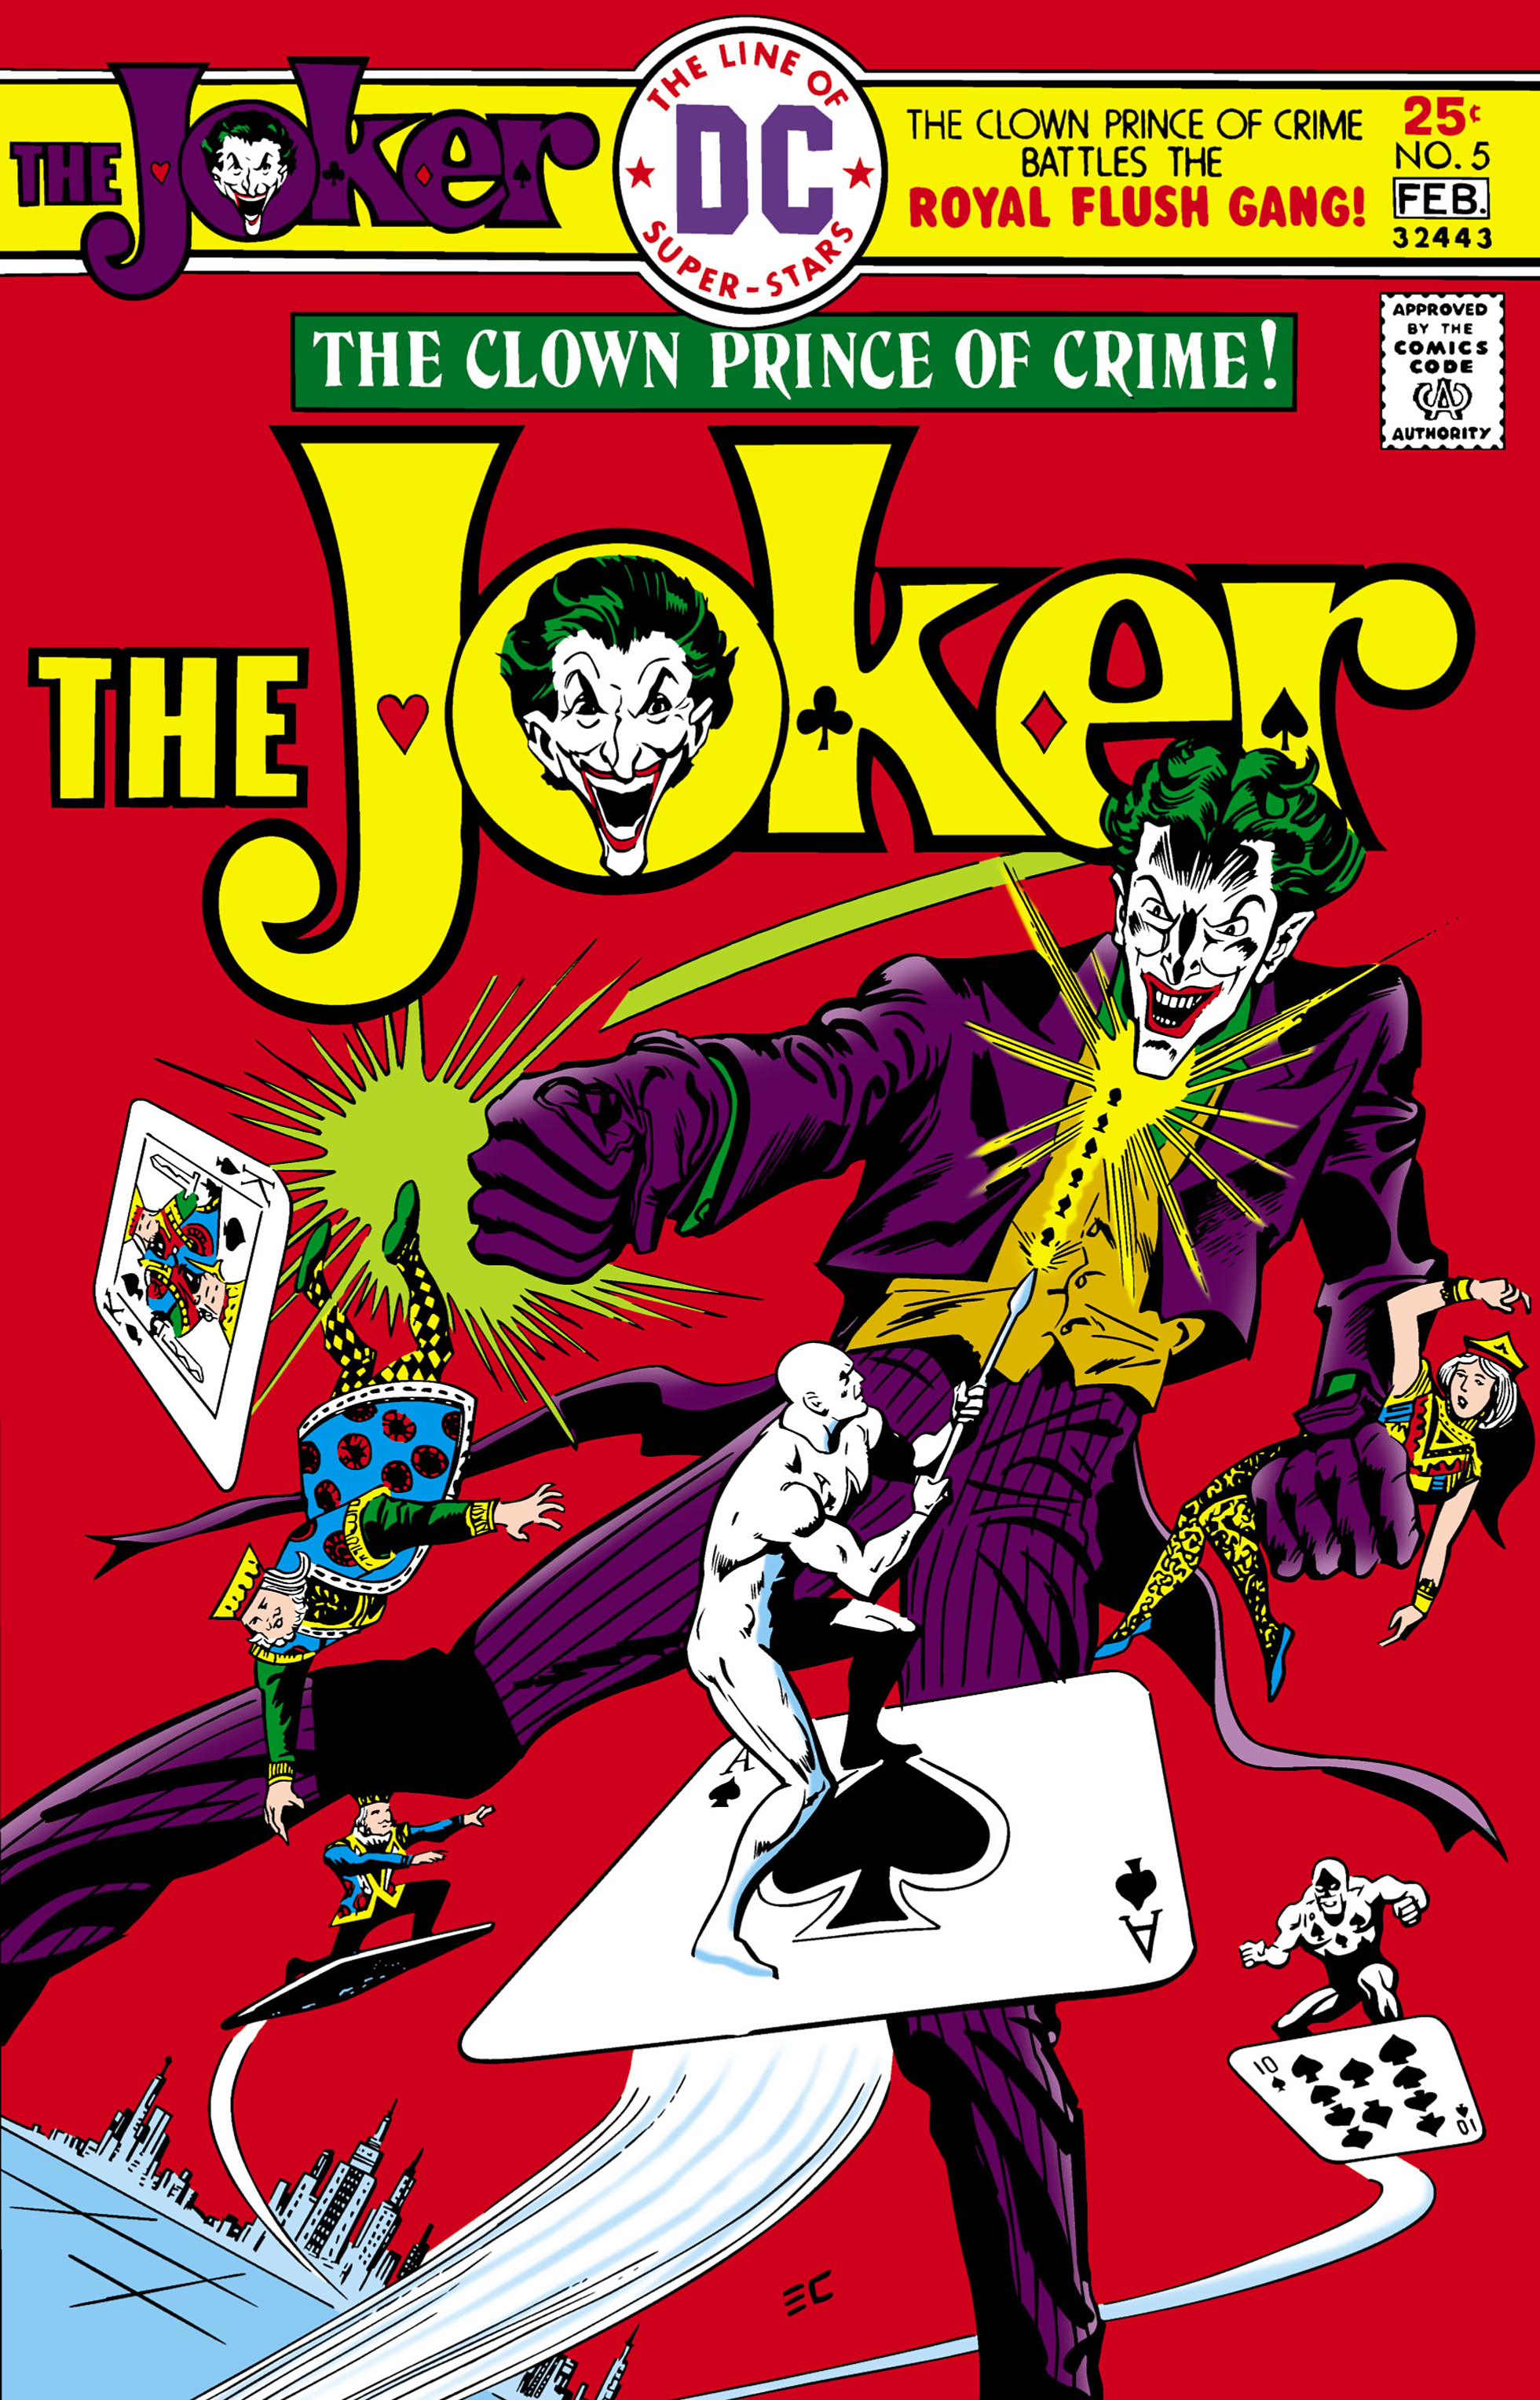 The Joker (1975-1976 + 2019): Chapter 5 - Page 1